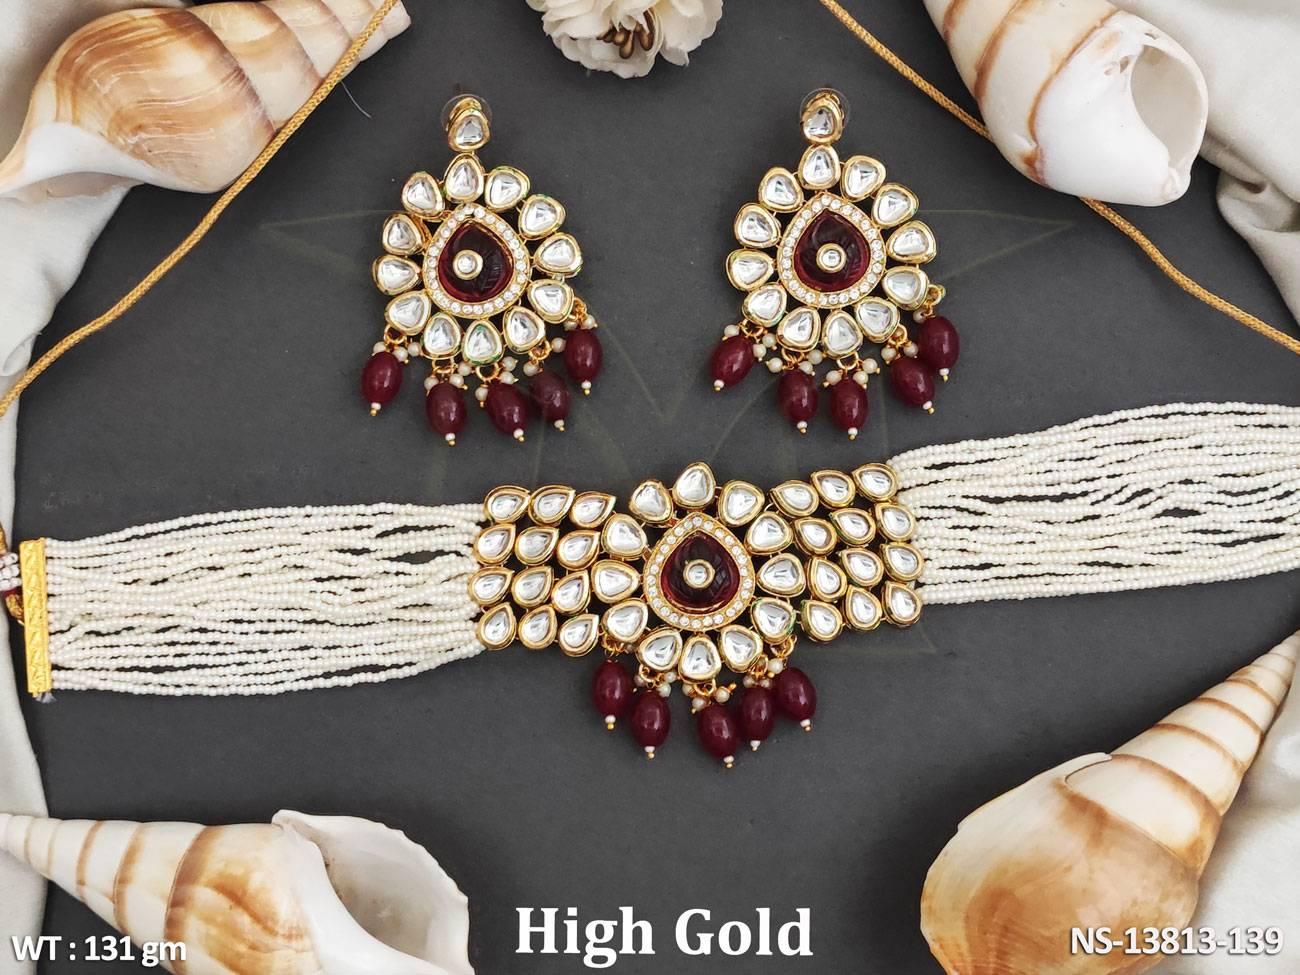 Introducing our Kundan choker necklace set, crafted with expert precision using high gold polish and Kundan stones.